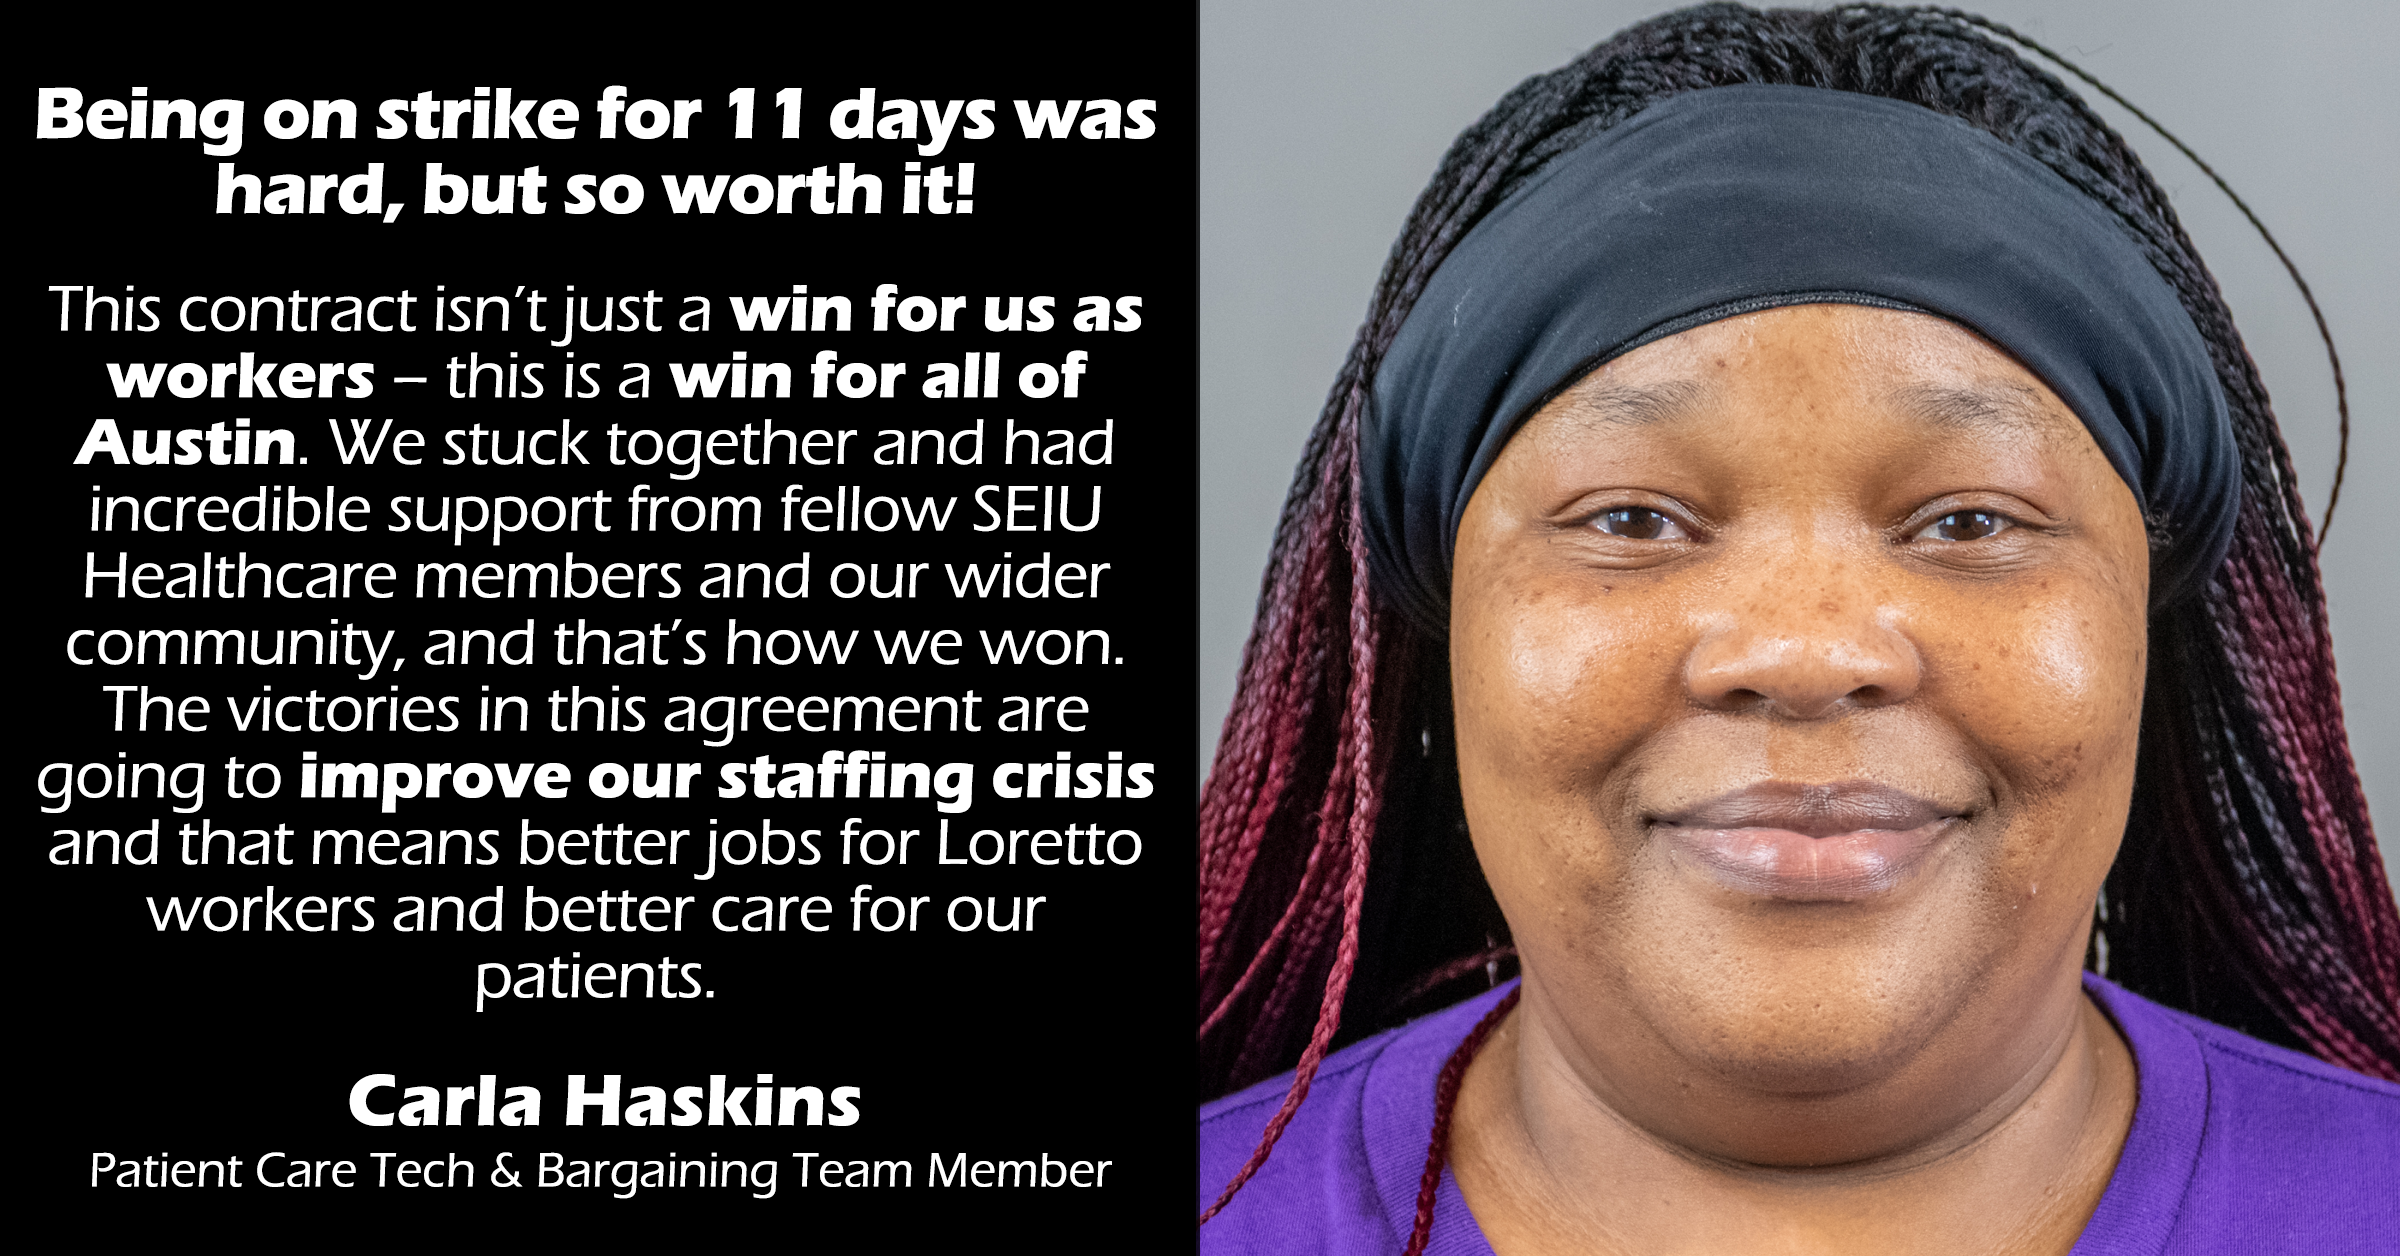 “Being on strike for 11 days was hard, but so worth it! This contract isn’t just a win for us as workers – this is a win for all of Austin. We stuck together and had incredible support from fellow SEIU Healthcare members and our wider community, and that’s how we won. The victories in this agreement are going to improve our staffing crisis and that means better jobs for Loretto workers and better care for our patients.”  

Carla Haskins 
Loretto PCT & Bargaining Team Member 
